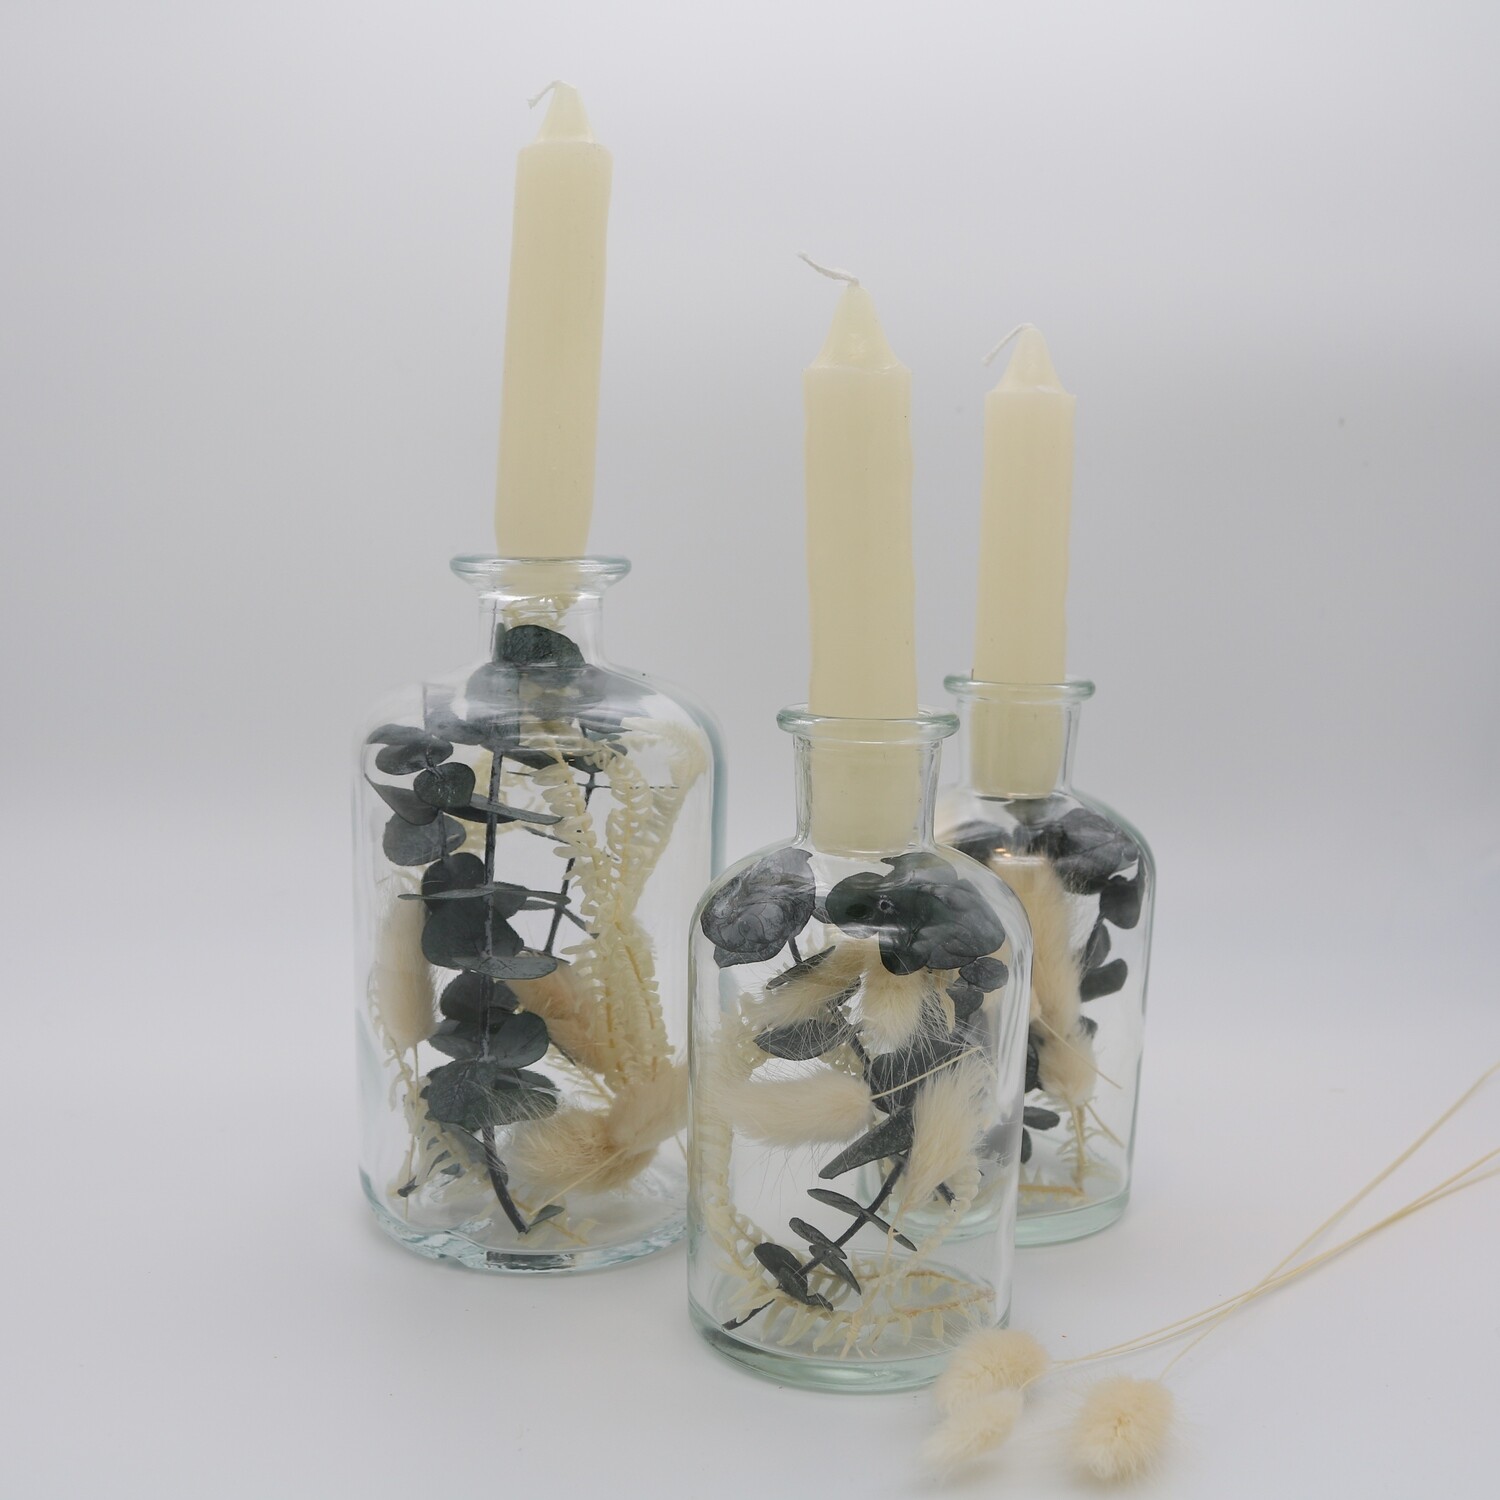 Candlestick with tapered candle "Green"